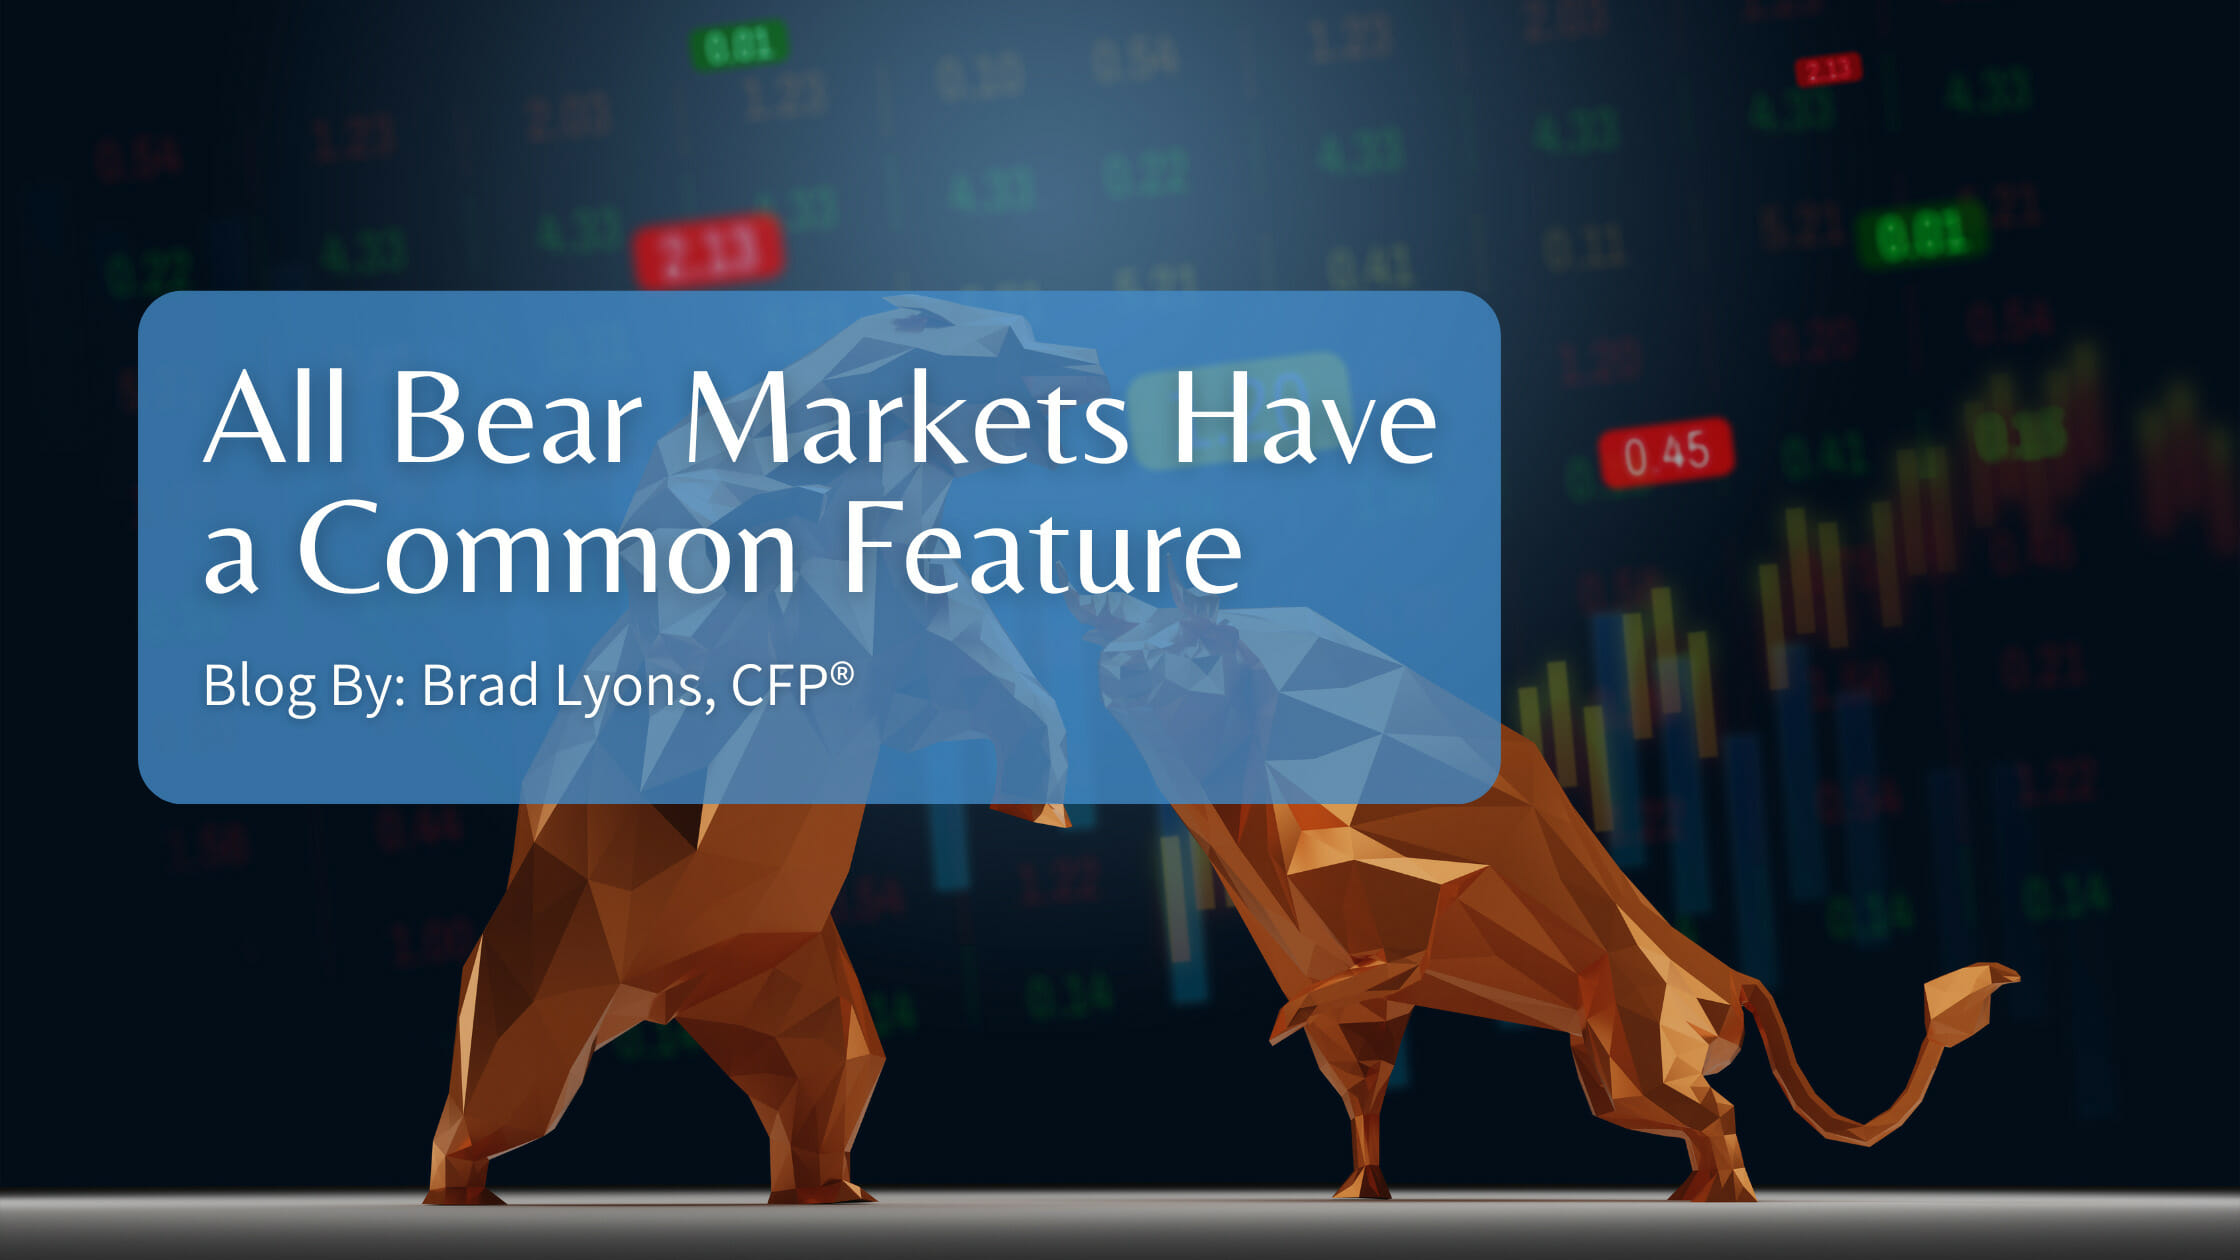 All Bear Markets Have a Common Feature